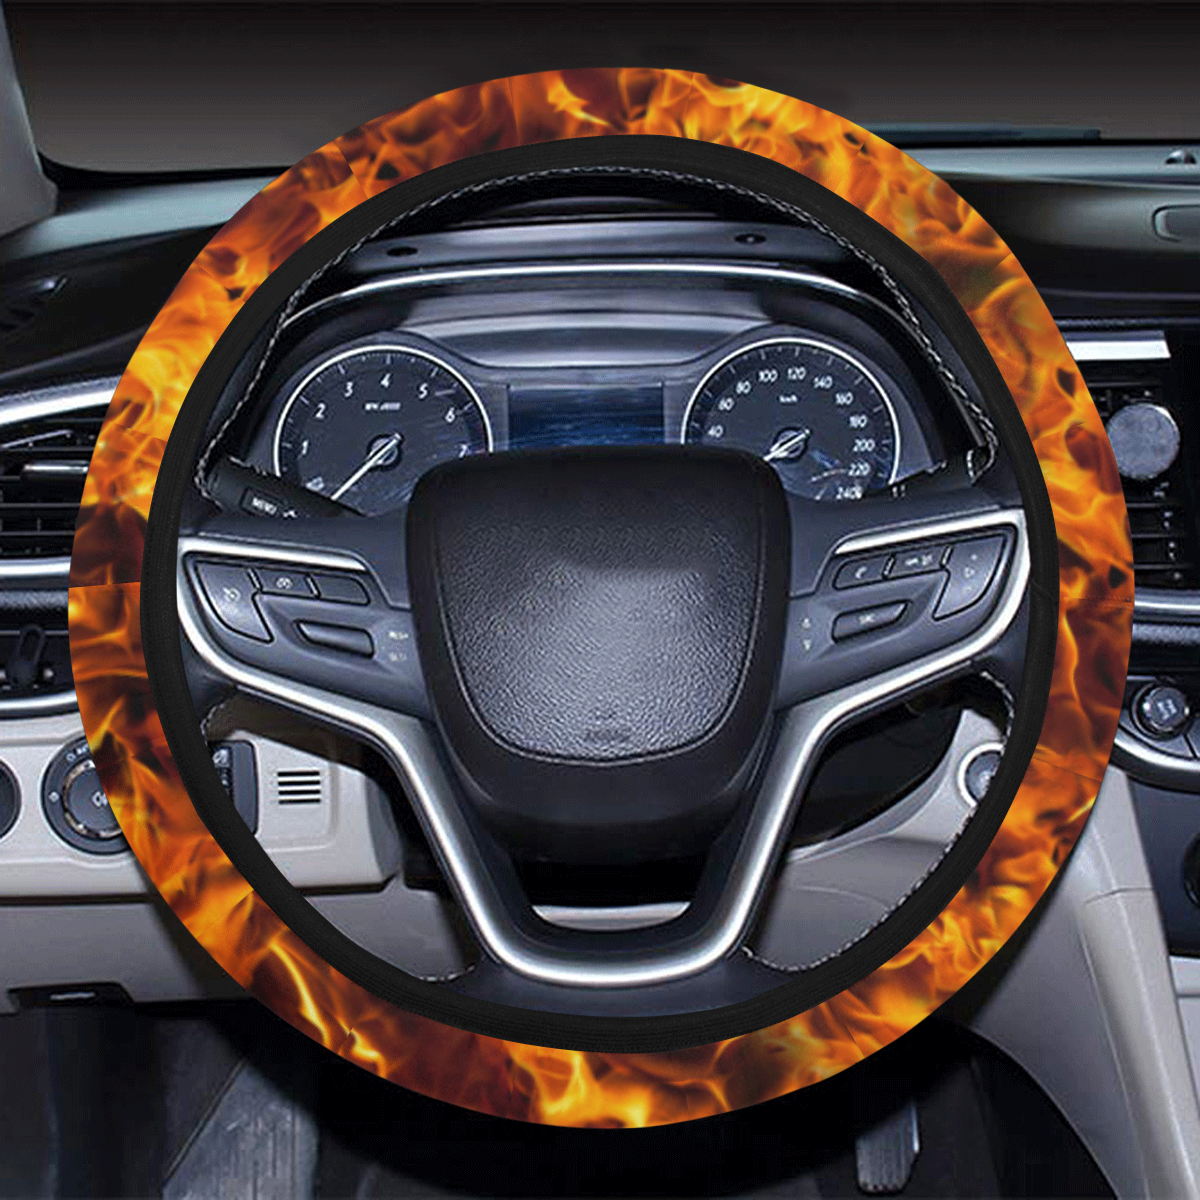 Flaming Fire Pattern Steering Wheel Cover with Elastic Edge